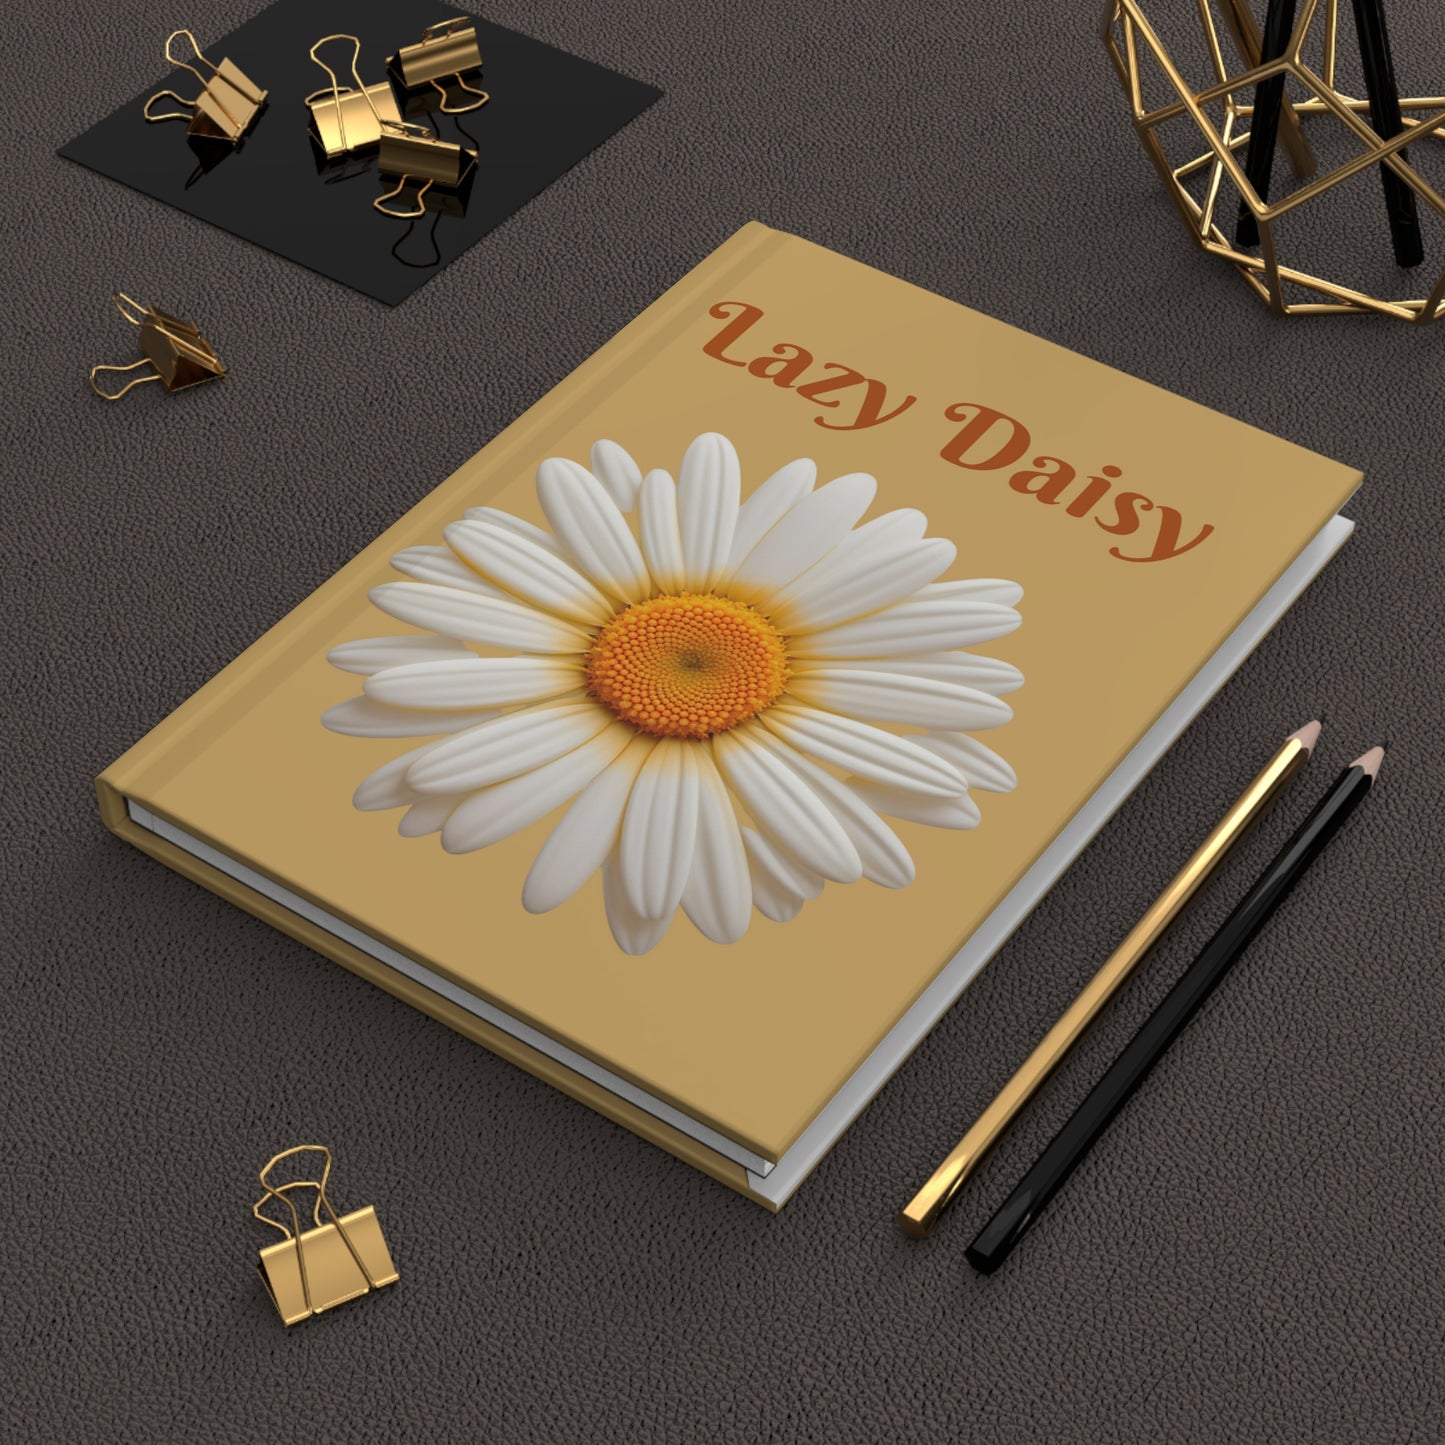 Daisy Hardcover Journal - Mindfulness & Gratitude Daily Diary, Floral Wellness and Self-Care Notebook, 6-Month Planner, 5.75"x 7.5" size